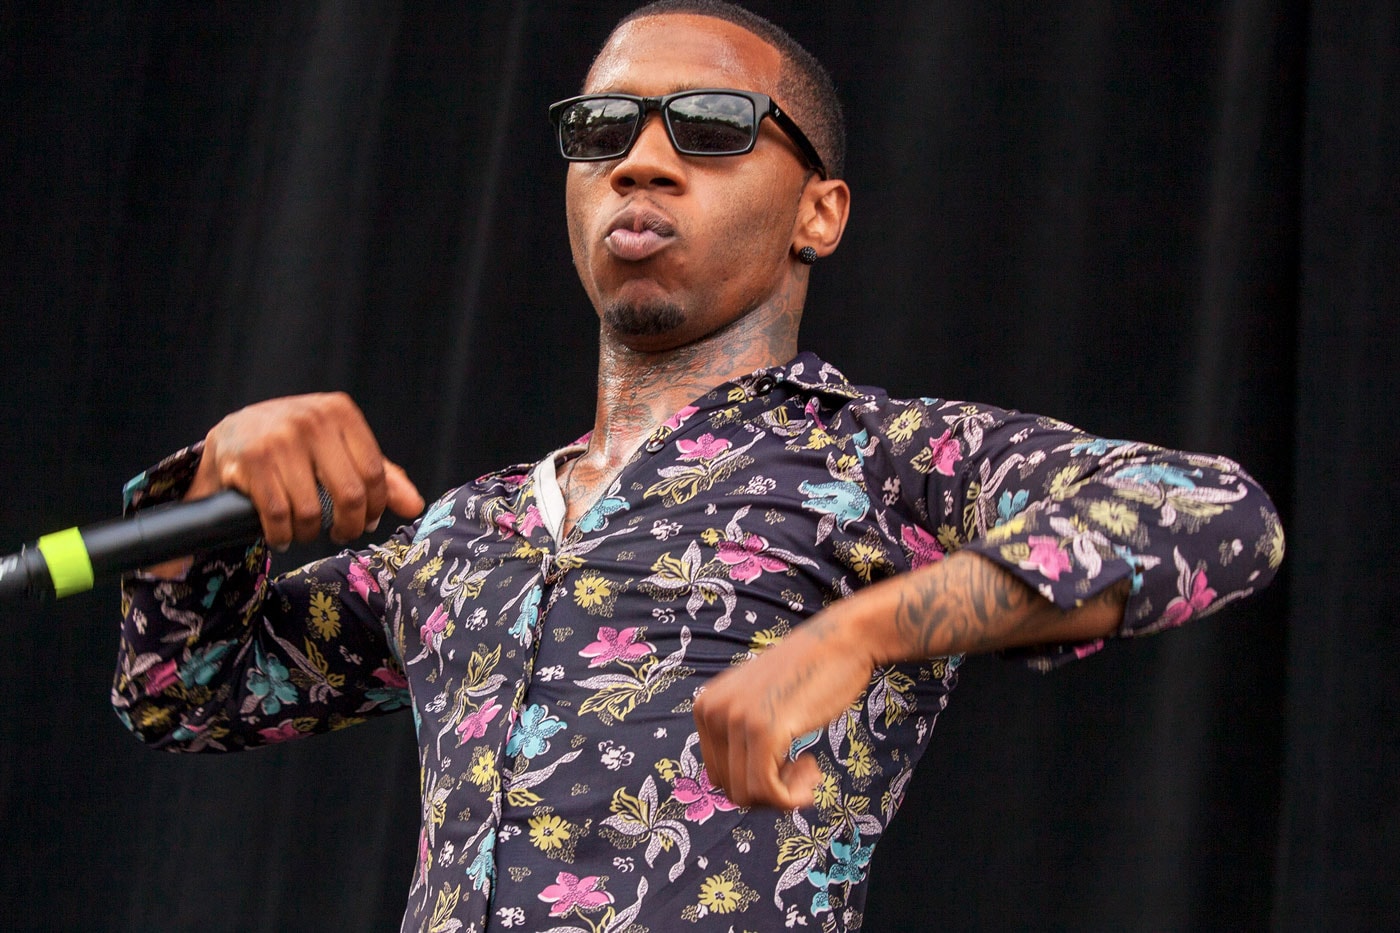 Lil B Explains Why He's Voting for Bernie Sanders and Not Hillary Clinton